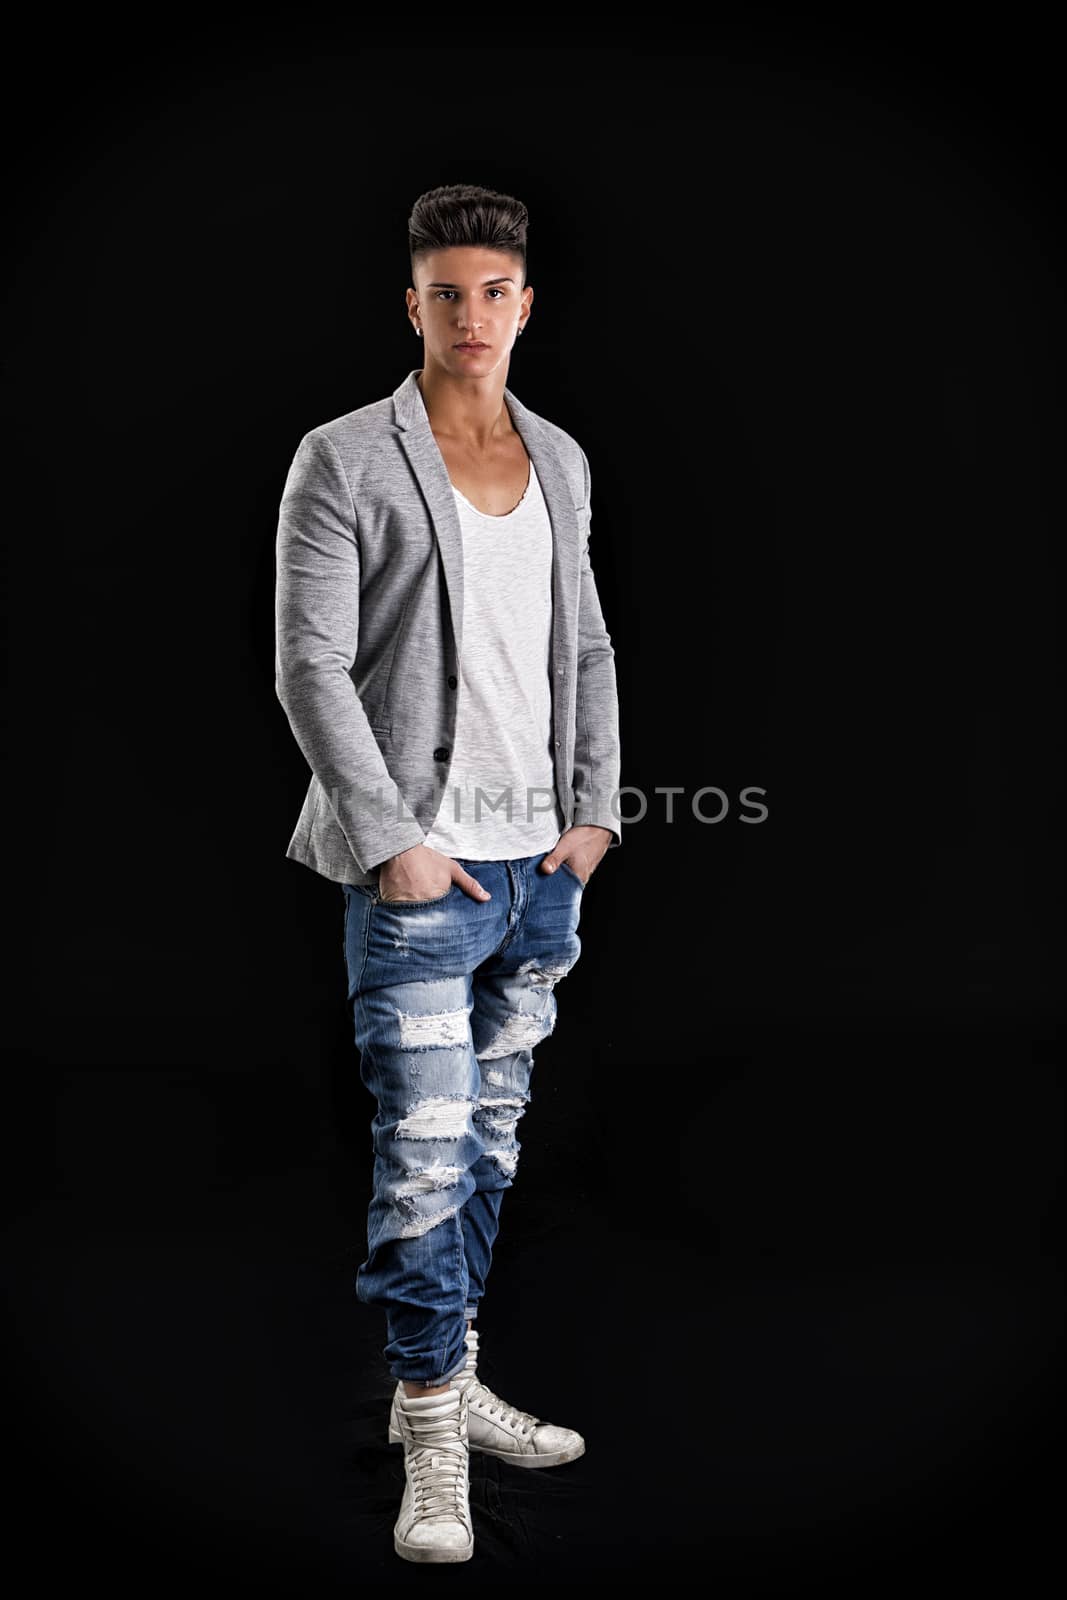 Attractive trendy young man standing on black background by artofphoto